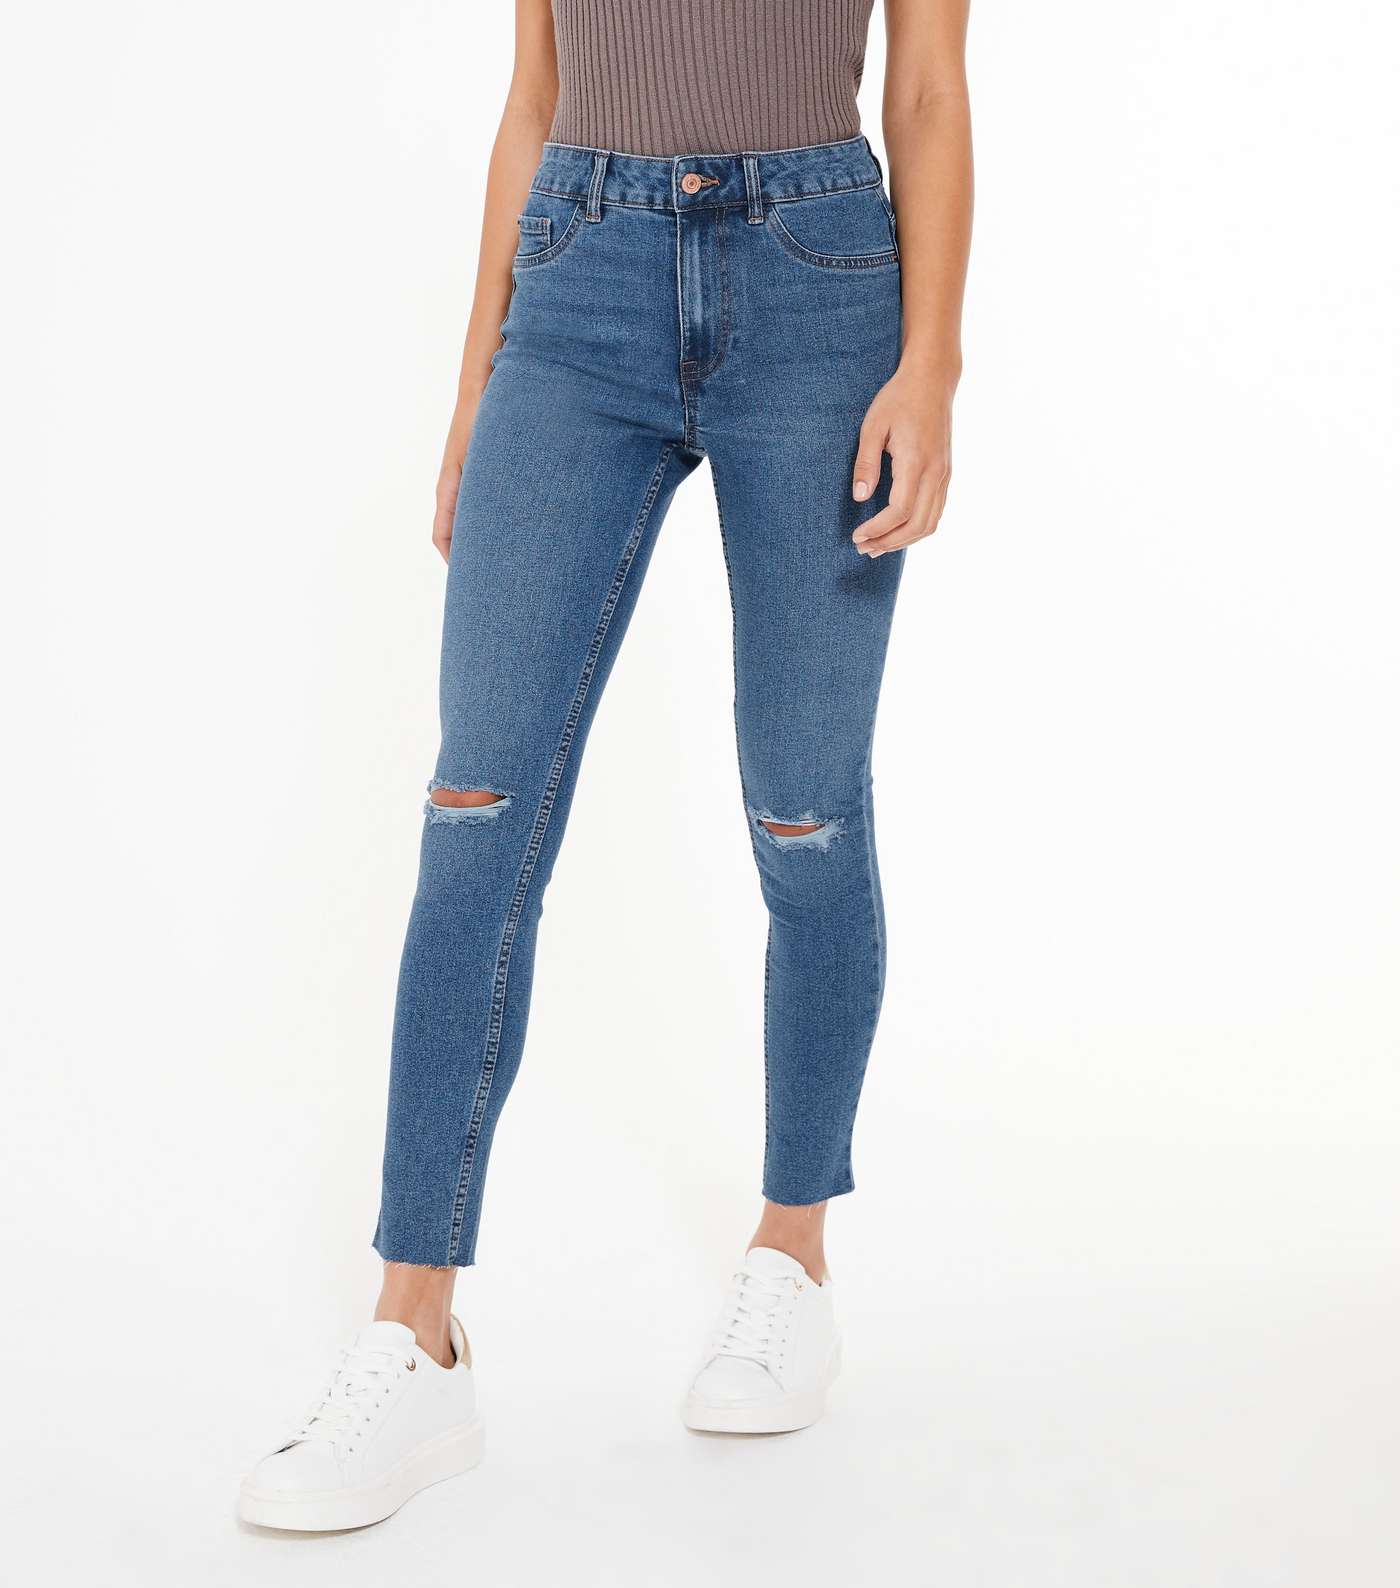 Blue Ripped India Super Skinny Jeans Image 2